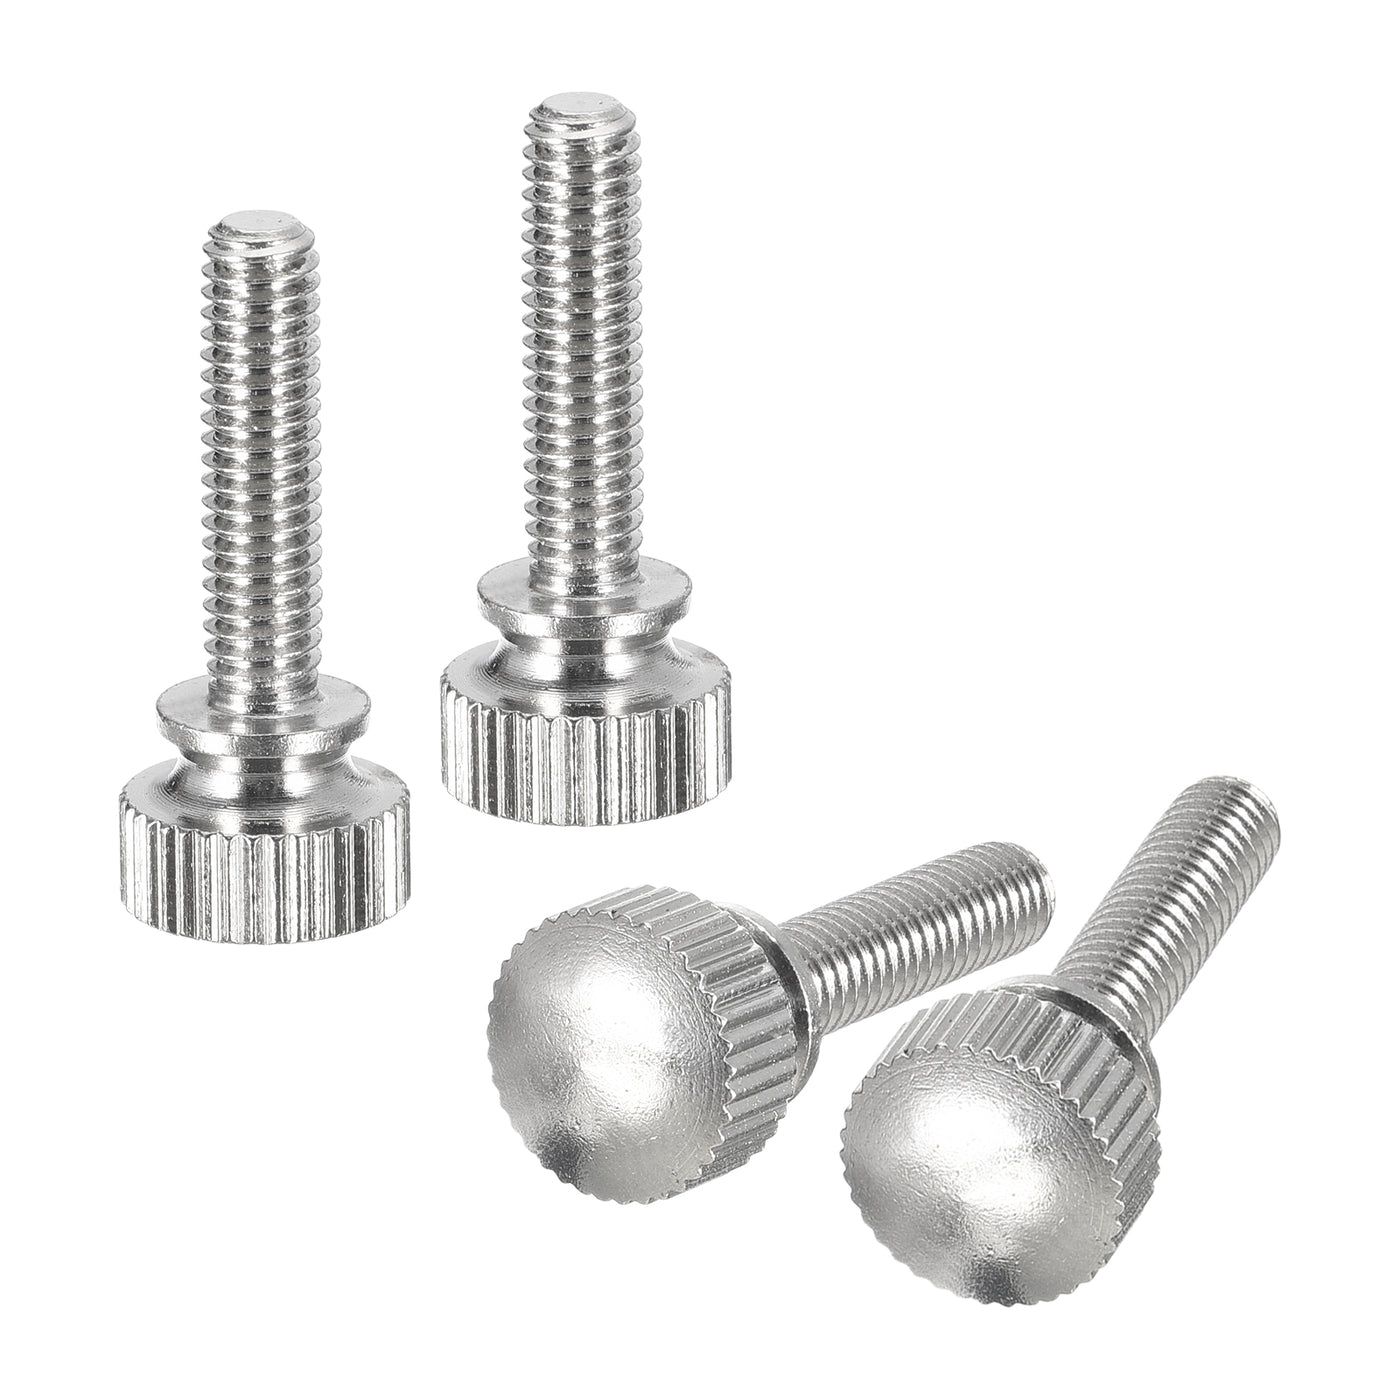 uxcell Uxcell M4x16mm Knurled Thumb Screws, 4pcs Brass Thumb Screws with Shoulder, Silver Tone